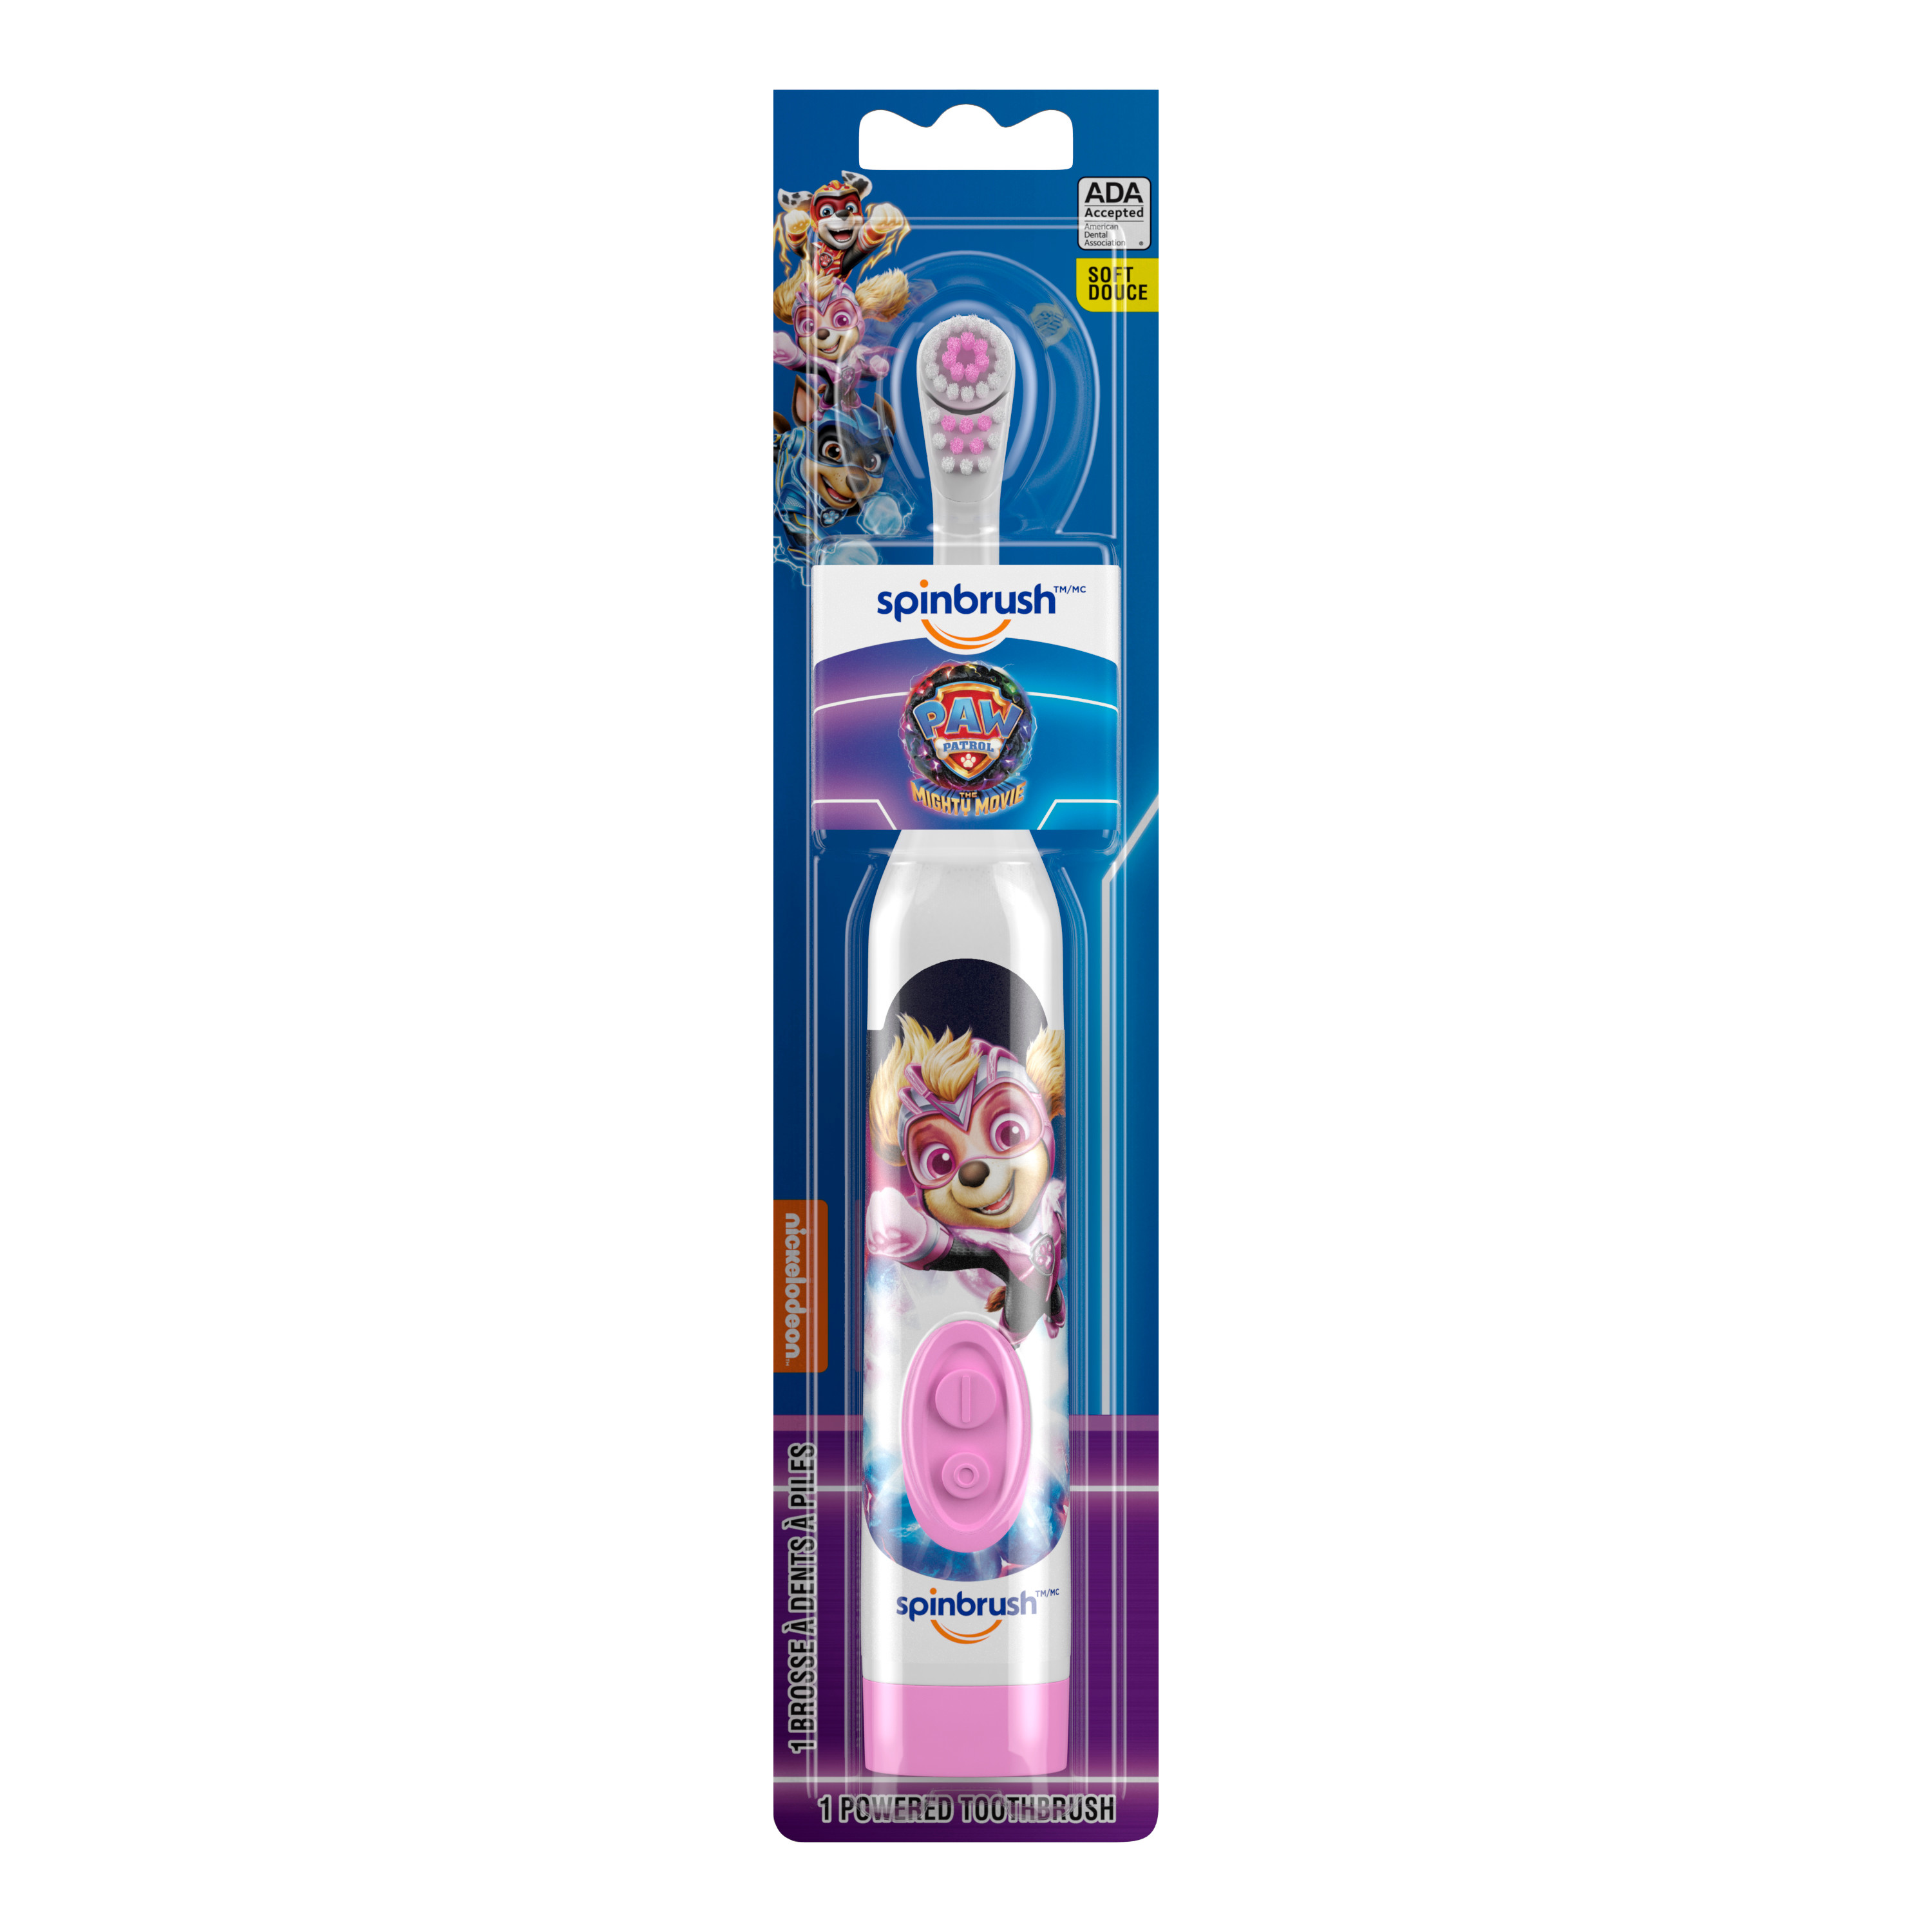 PAW Patrol Spinbrush Kids Battery-Powered Toothbrush, Soft Bristles, Ages 3+, Character May Vary - image 4 of 7